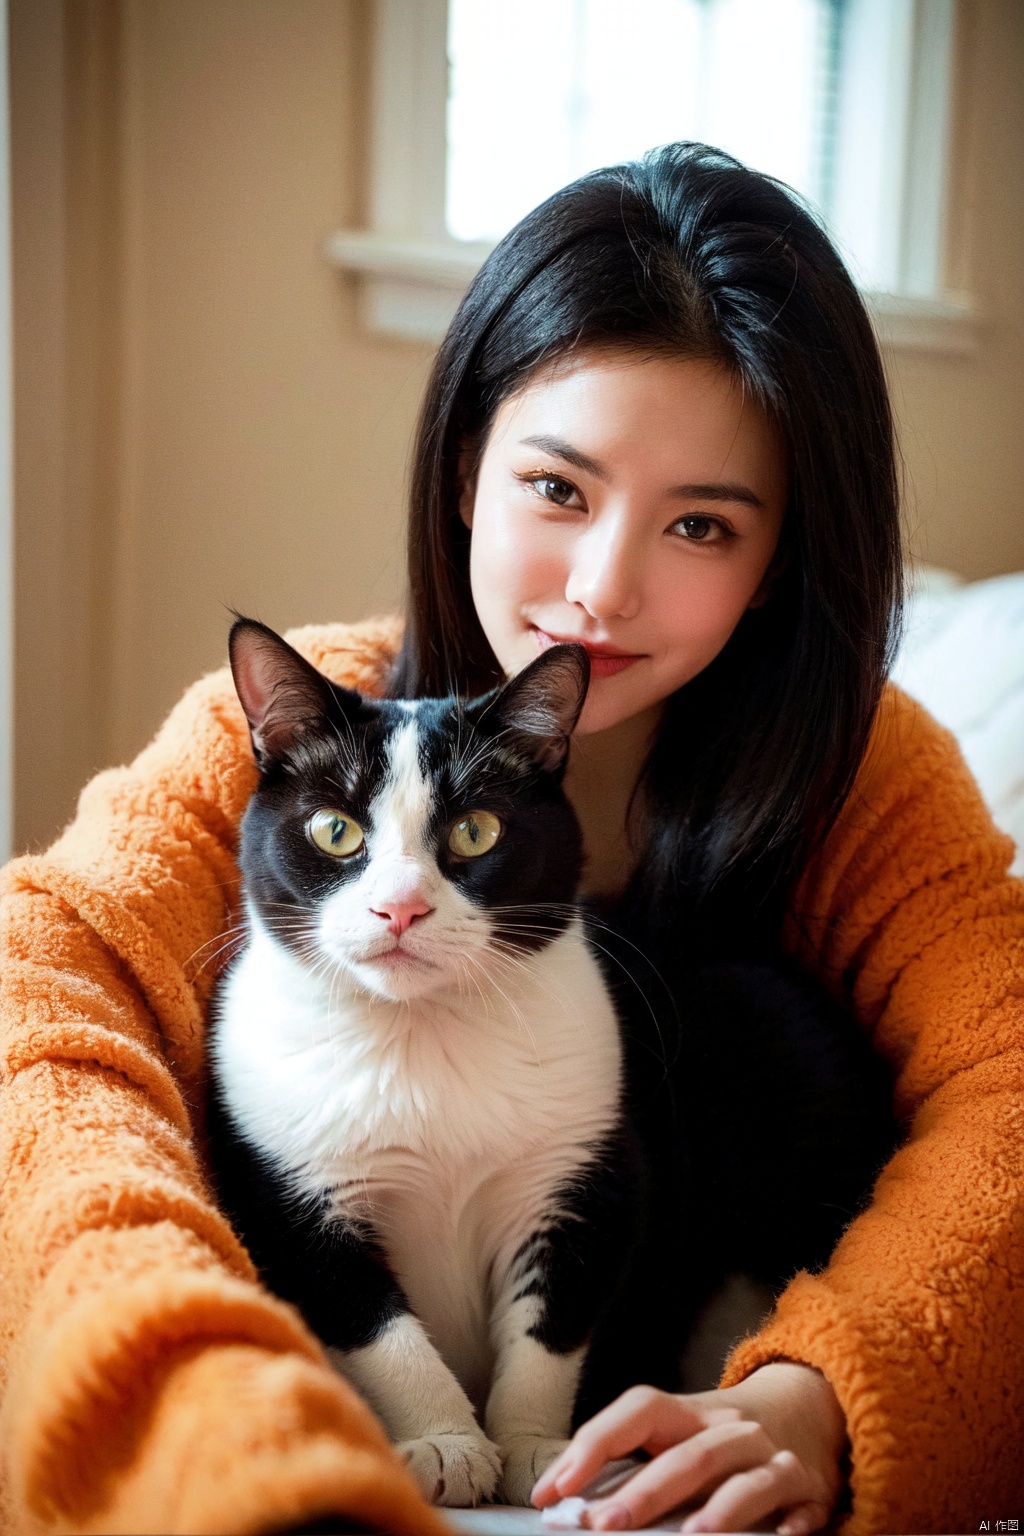  Certainly! Upon examining the image, I would describe it as a warm and inviting portrait of a young woman cuddling with her orange cat. The lighting is soft and diffused, creating a sense of comfort and relaxation. The color palette is rich and vibrant, with the woman's pink shirt and the cat's orange fur providing a pleasing contrast.
From a compositional standpoint, the image is well-balanced, with the subject's gaze directing the viewer's attention towards her. The woman's smile and the cat's gentle nuzzle create a sense of affection and contentment. The quality of the image is excellent, with sharp focus on both the woman and the cat, and no distractions in the background.
In terms of style, I would say that the image is a perfect example of a candid portrait. The woman's natural expression and the cat's relaxed posture convey a sense of authenticity and trust. Overall, this image is a beautiful representation of the bond between the woman and her cat, and it would make for a lovely addition to any collection of pet portraits or candid photography.